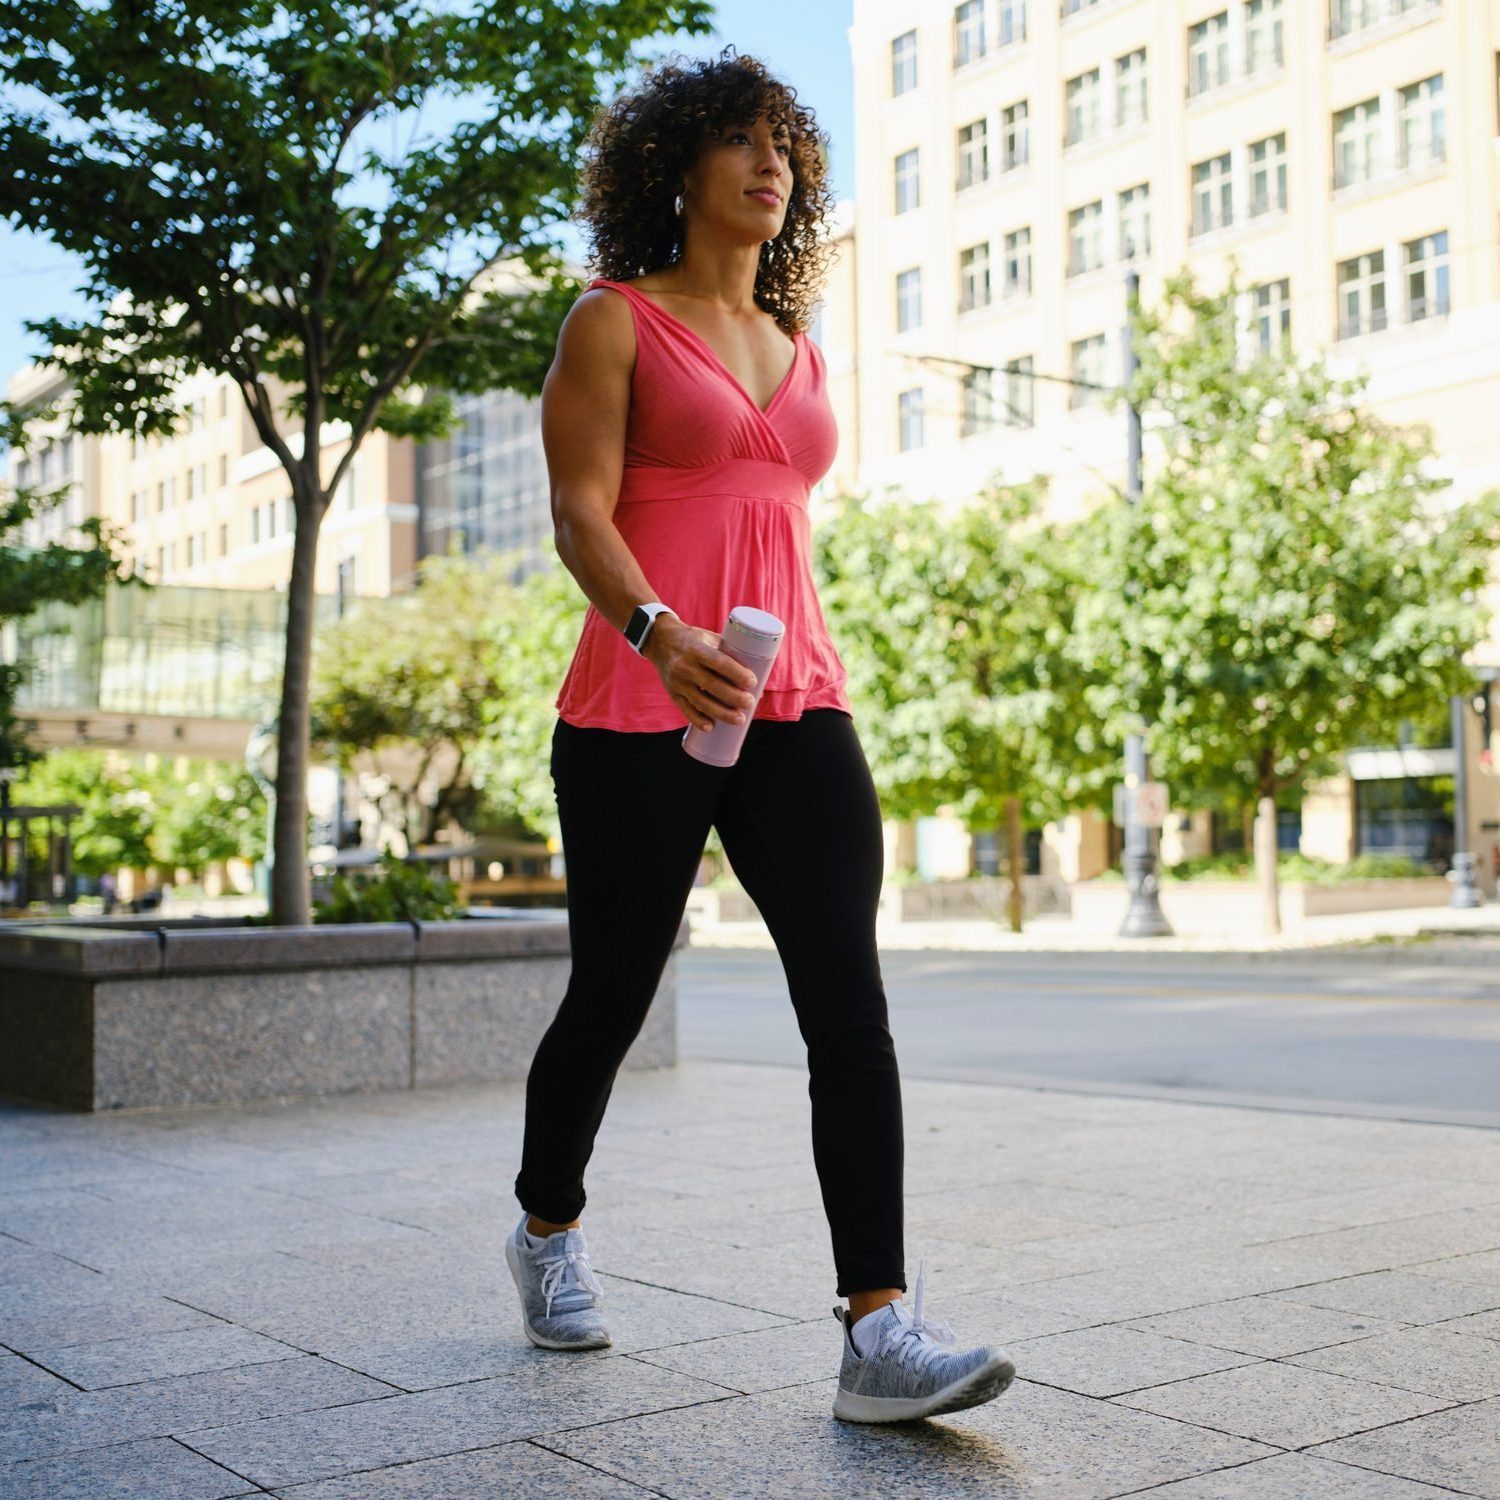 Here's the Average Walking Speed—and What It Says About Your Health